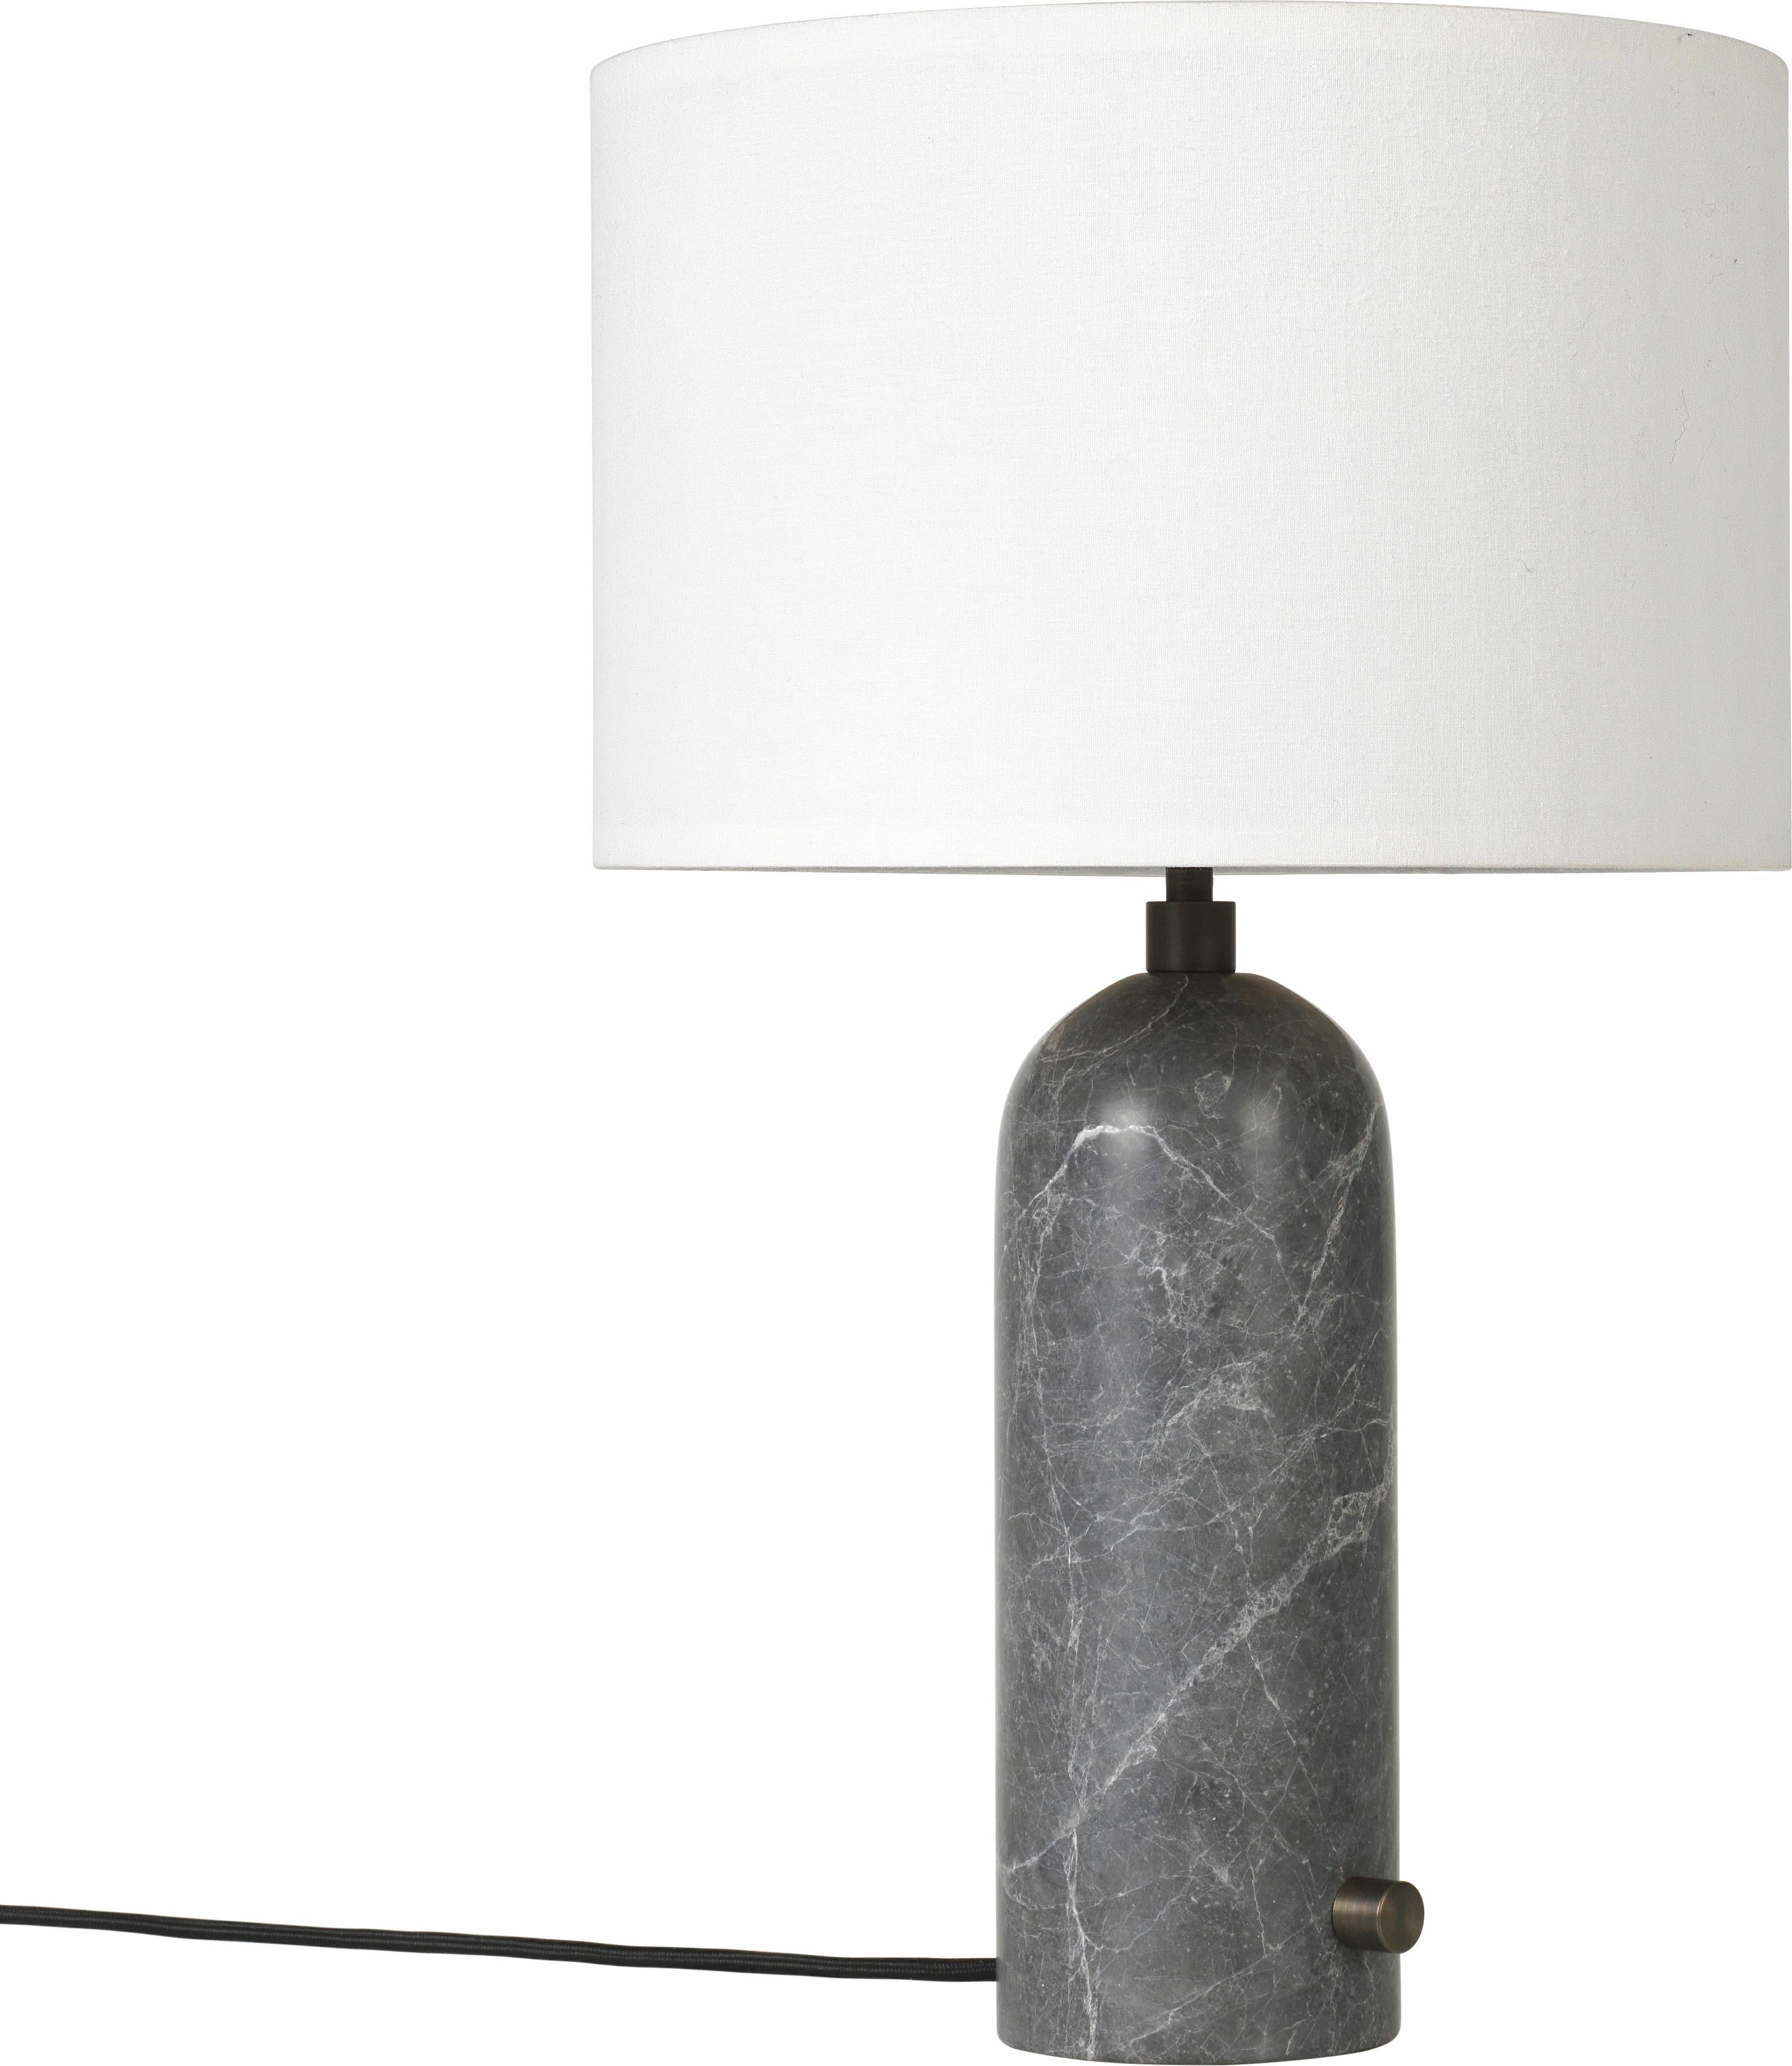 Large 'Gravity' Marble Table Lamp by Space Copenhagen for Gubi in Black For Sale 4